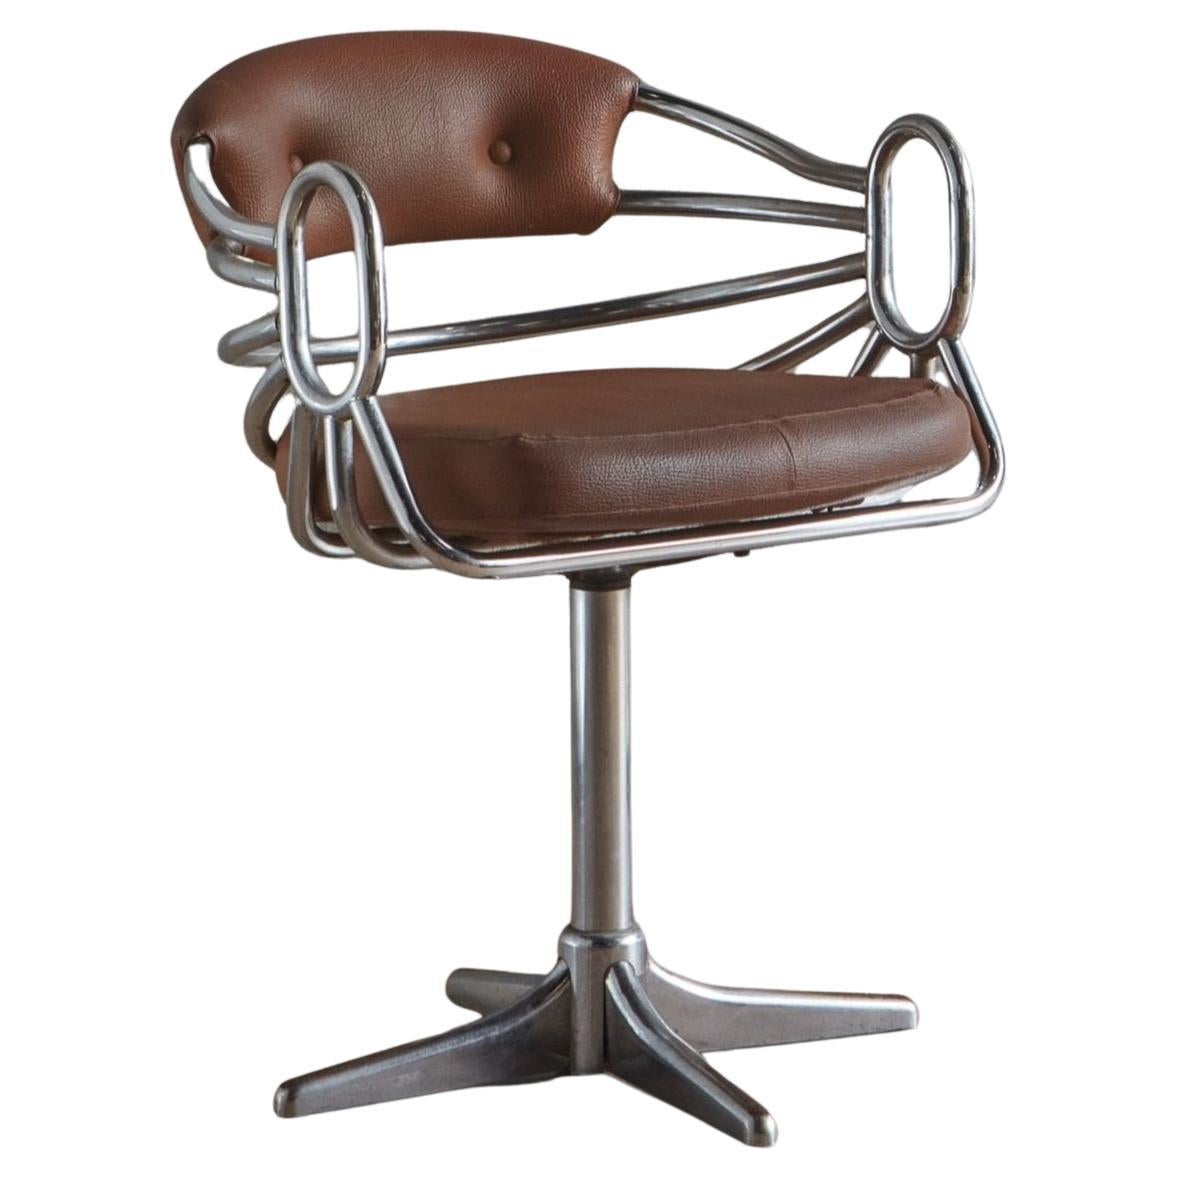 Chrome Swivel Desk Chair in Brown Leather, Italy 1960s - 2 Available